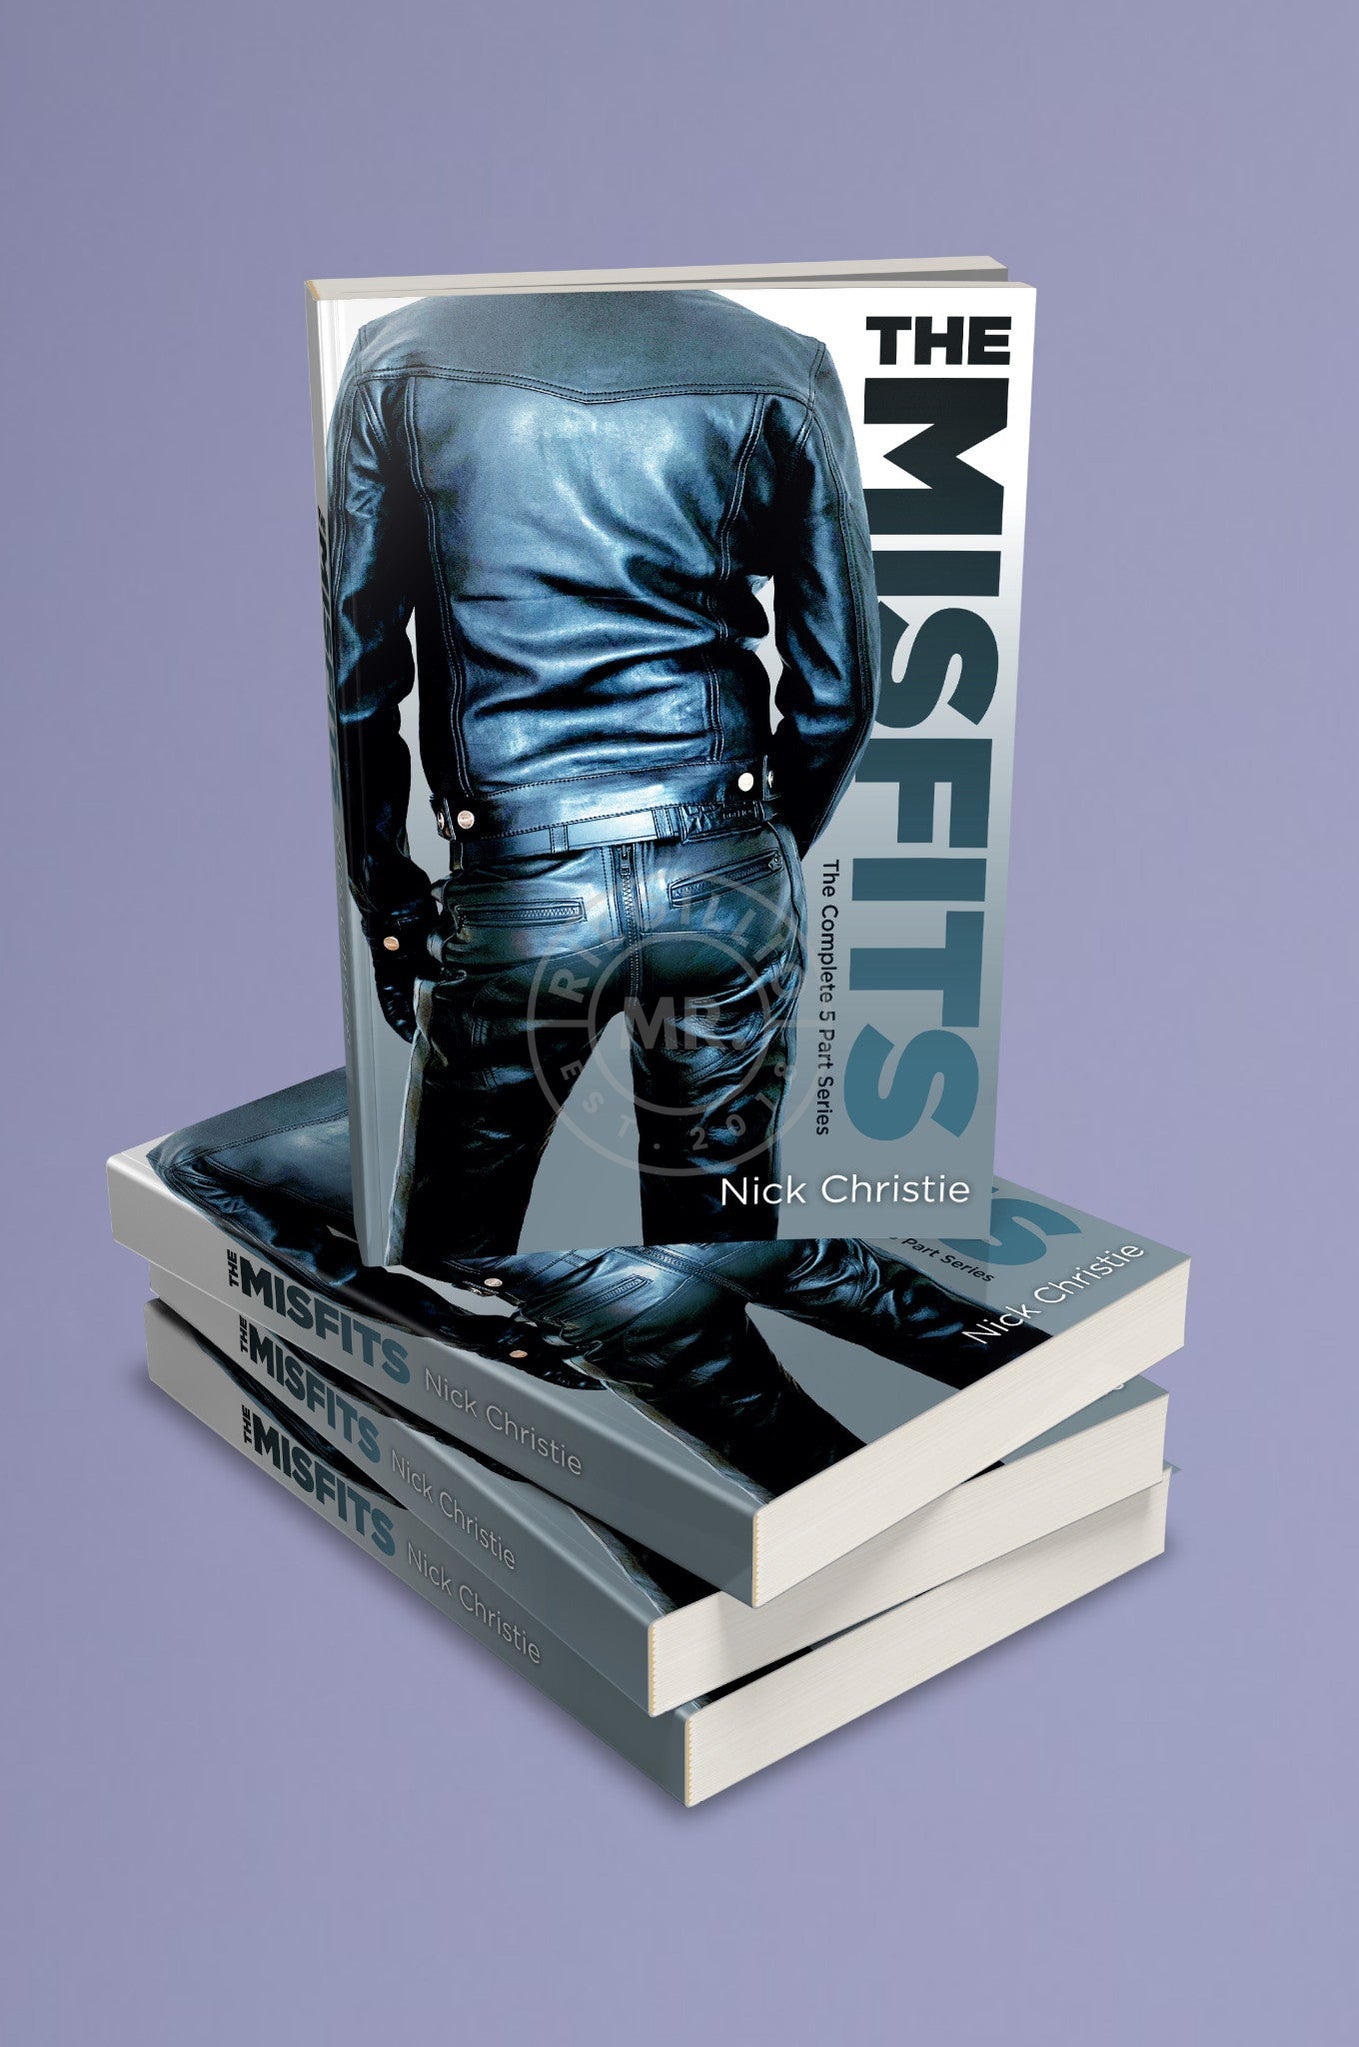 The Misfits - Complete 5 Part Book Series by Nick Christie at MR. Riegillio